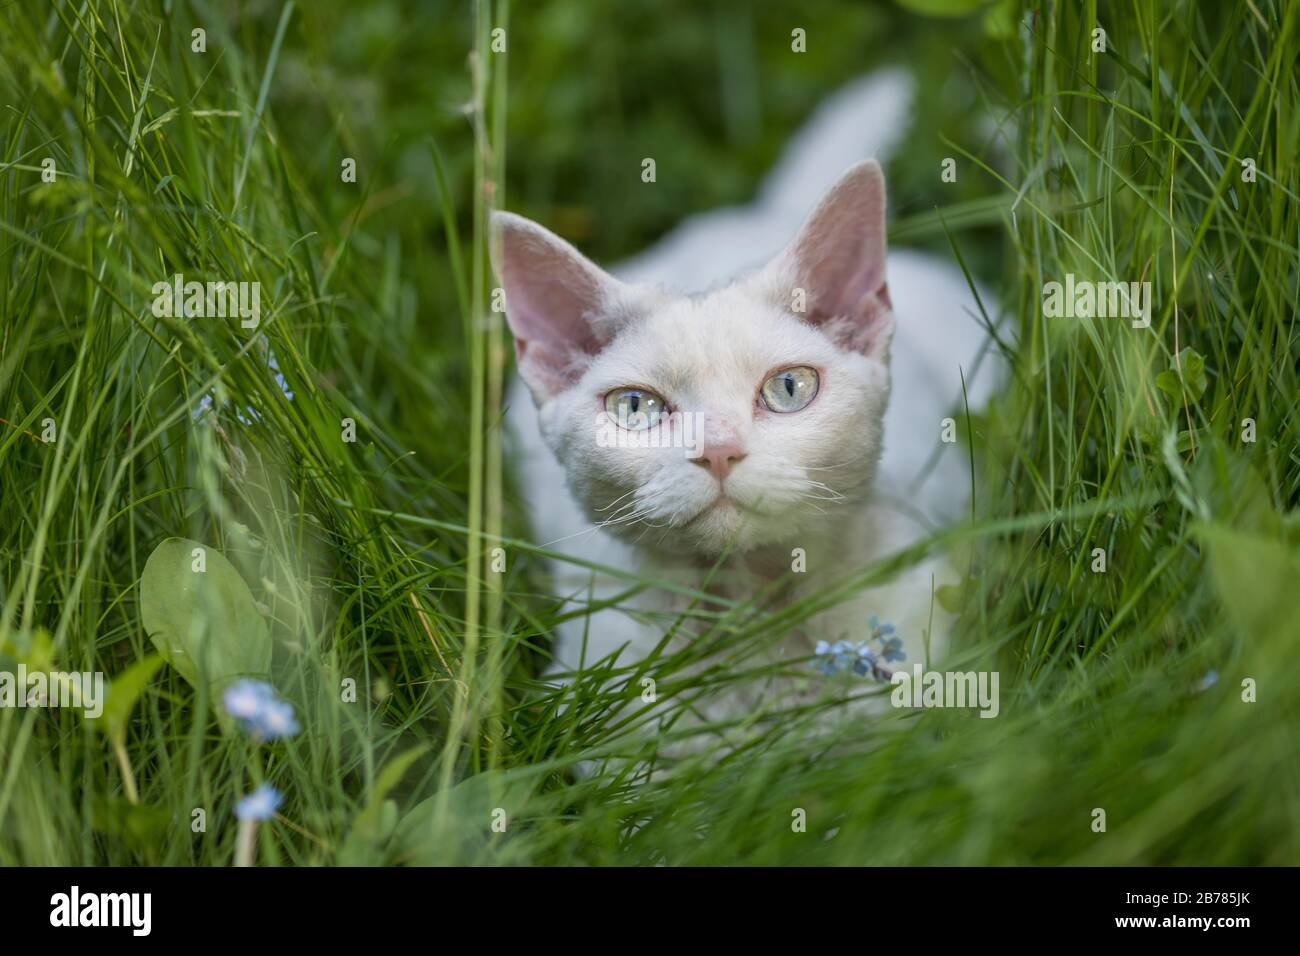 A white Devon Rex cat hiding in high green grass. The little cat looking at camera. Stock Photo